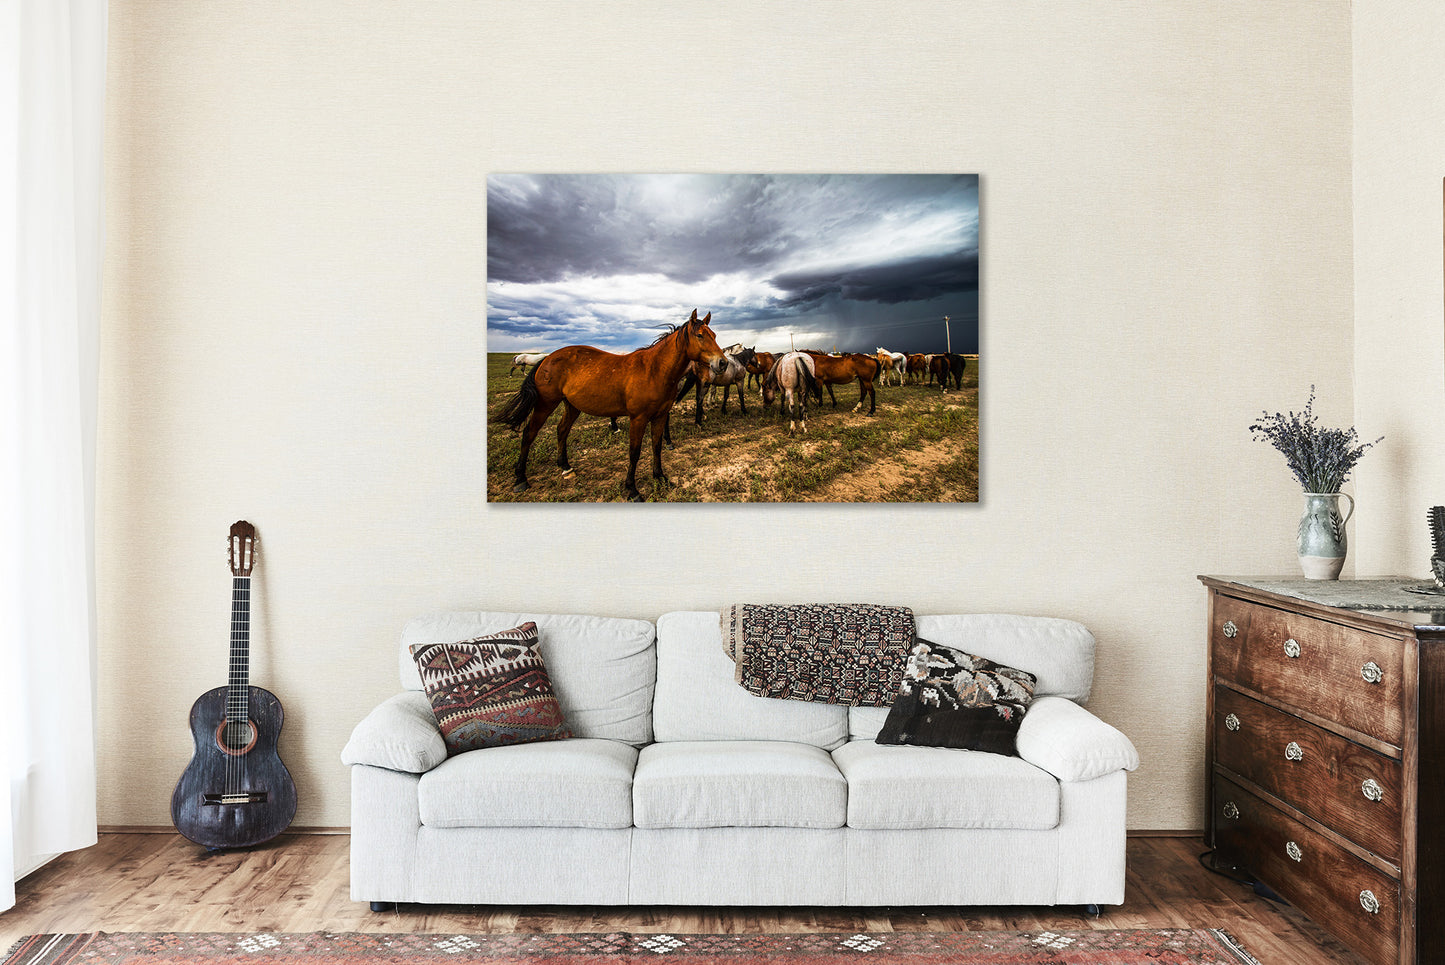 Western Metal Print - Picture of Horse Proudly Watching Over Herd as Storm Approaches in Oklahoma Panhandle - Animal Wall Art Photo Decor